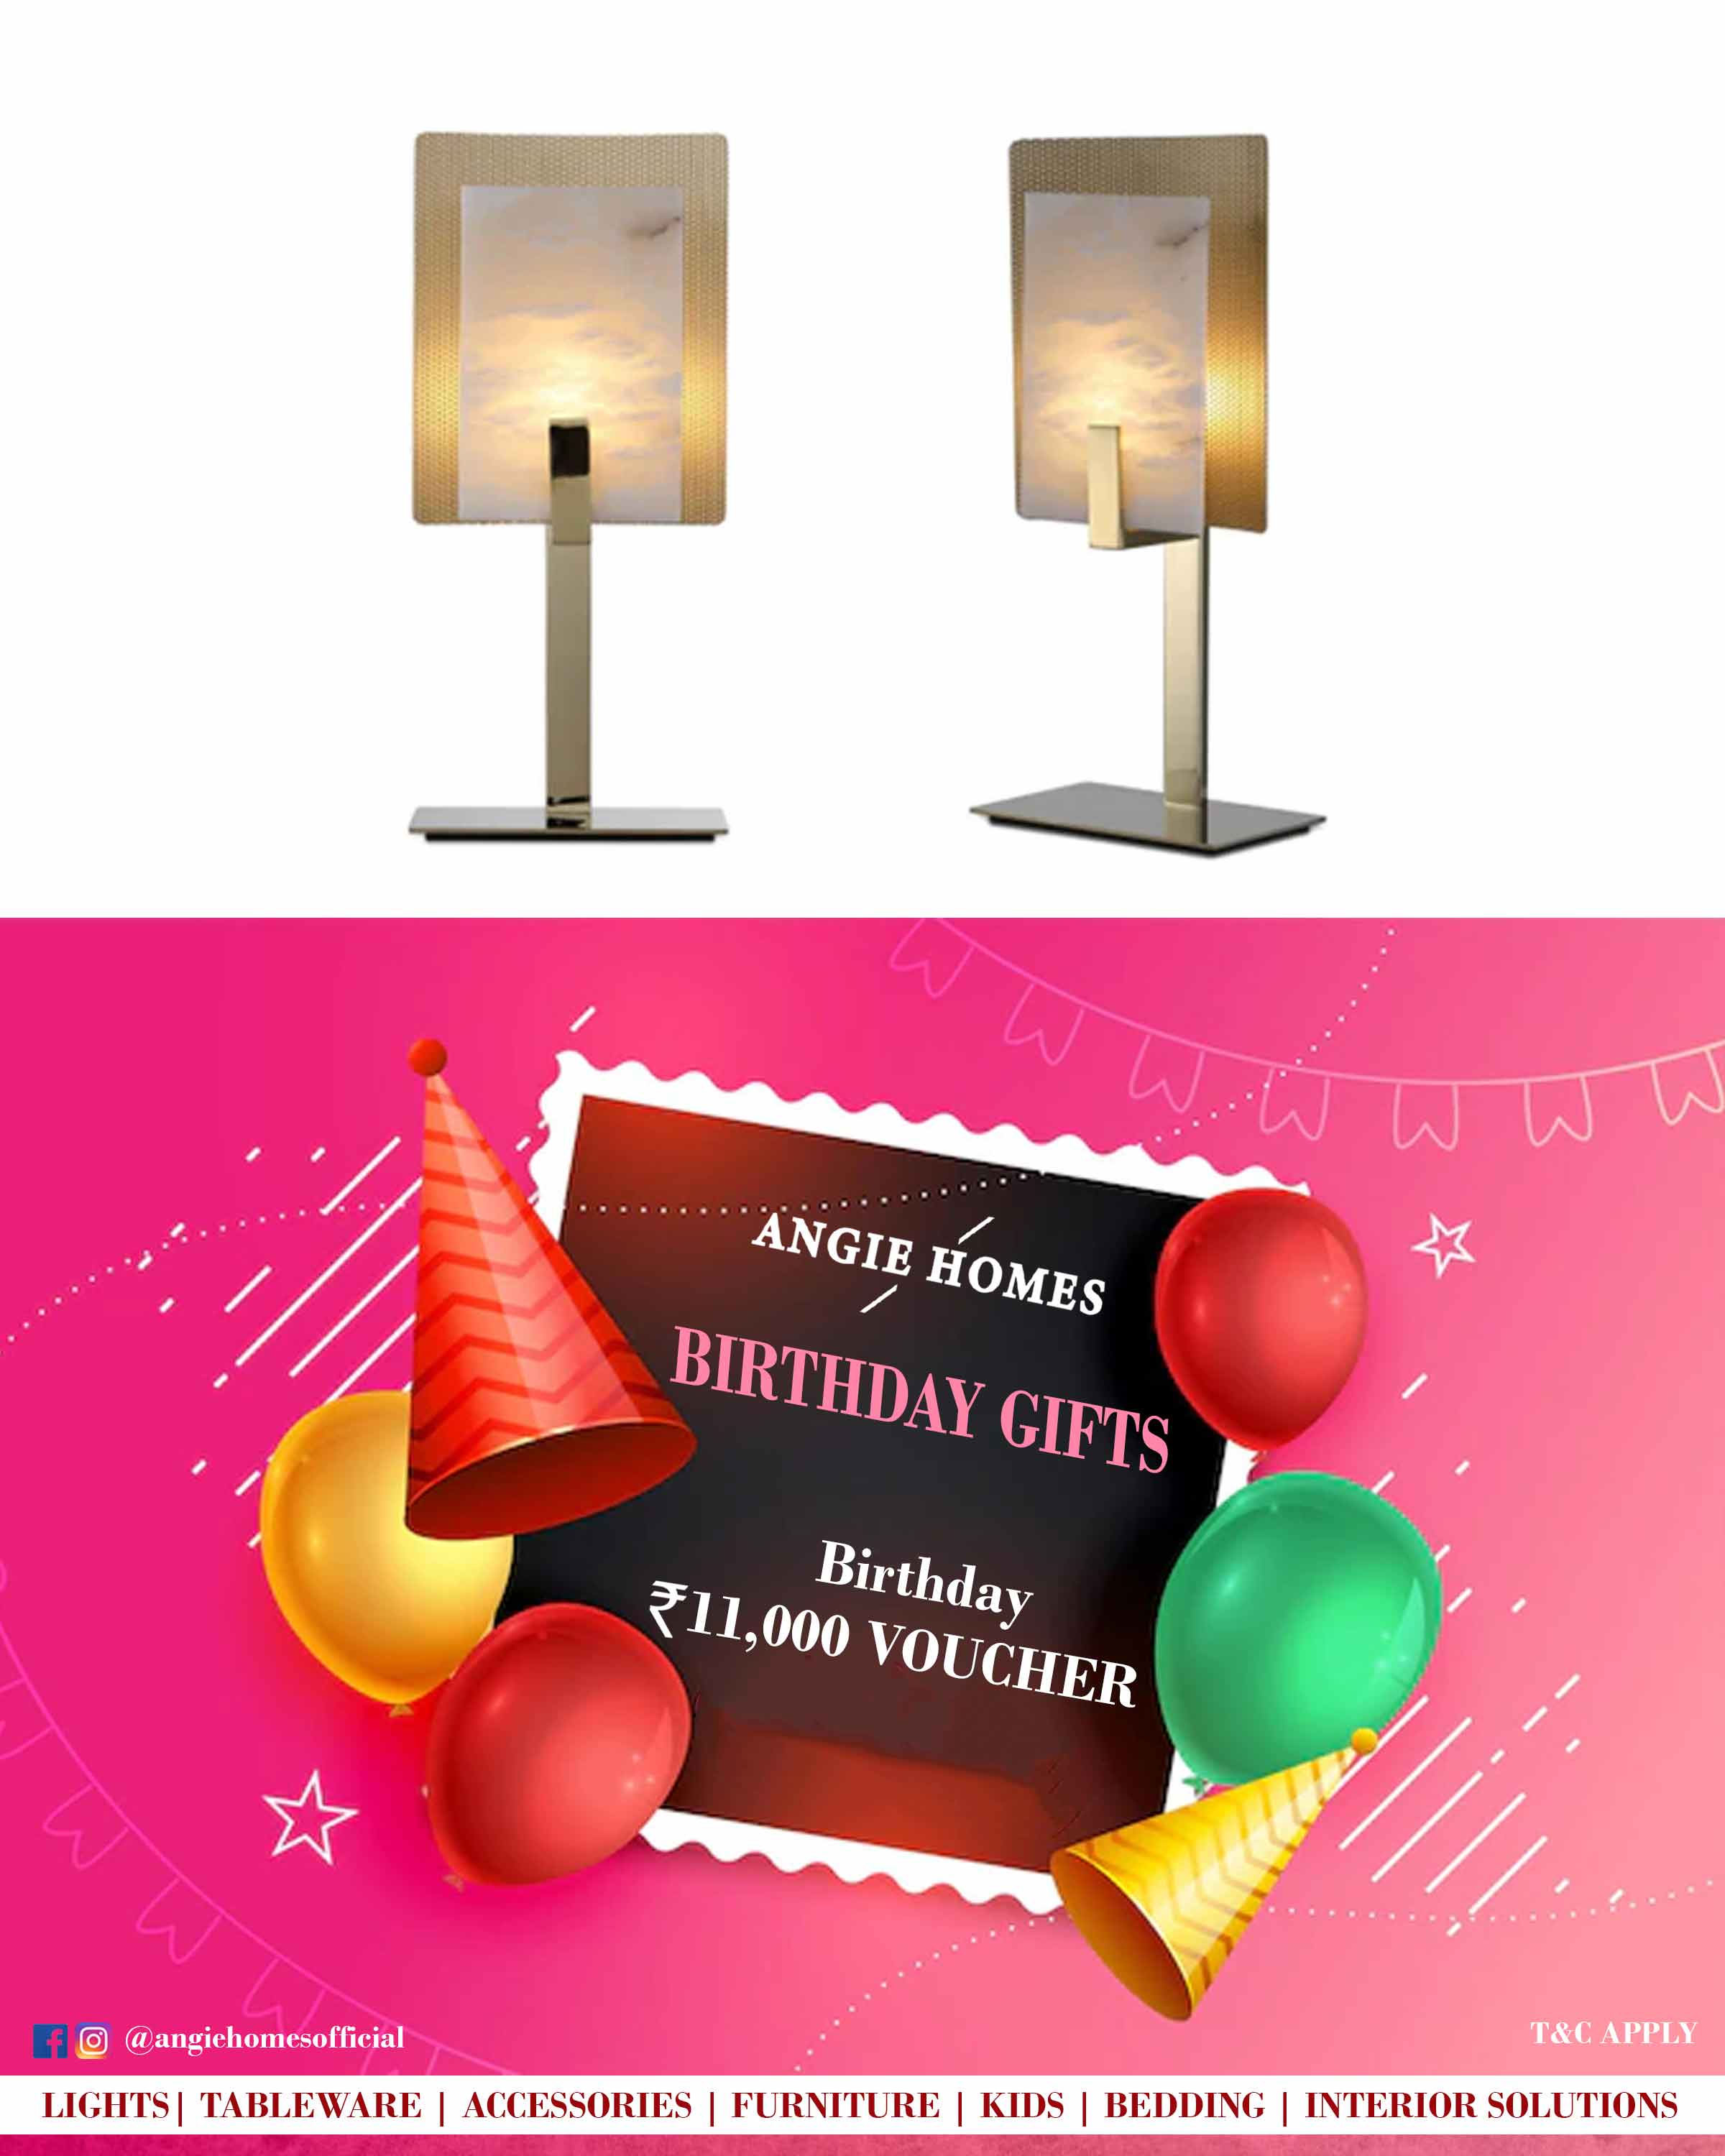 Happy Birthday Gift Voucher for Kids Table Lamp ANGIE HOMES